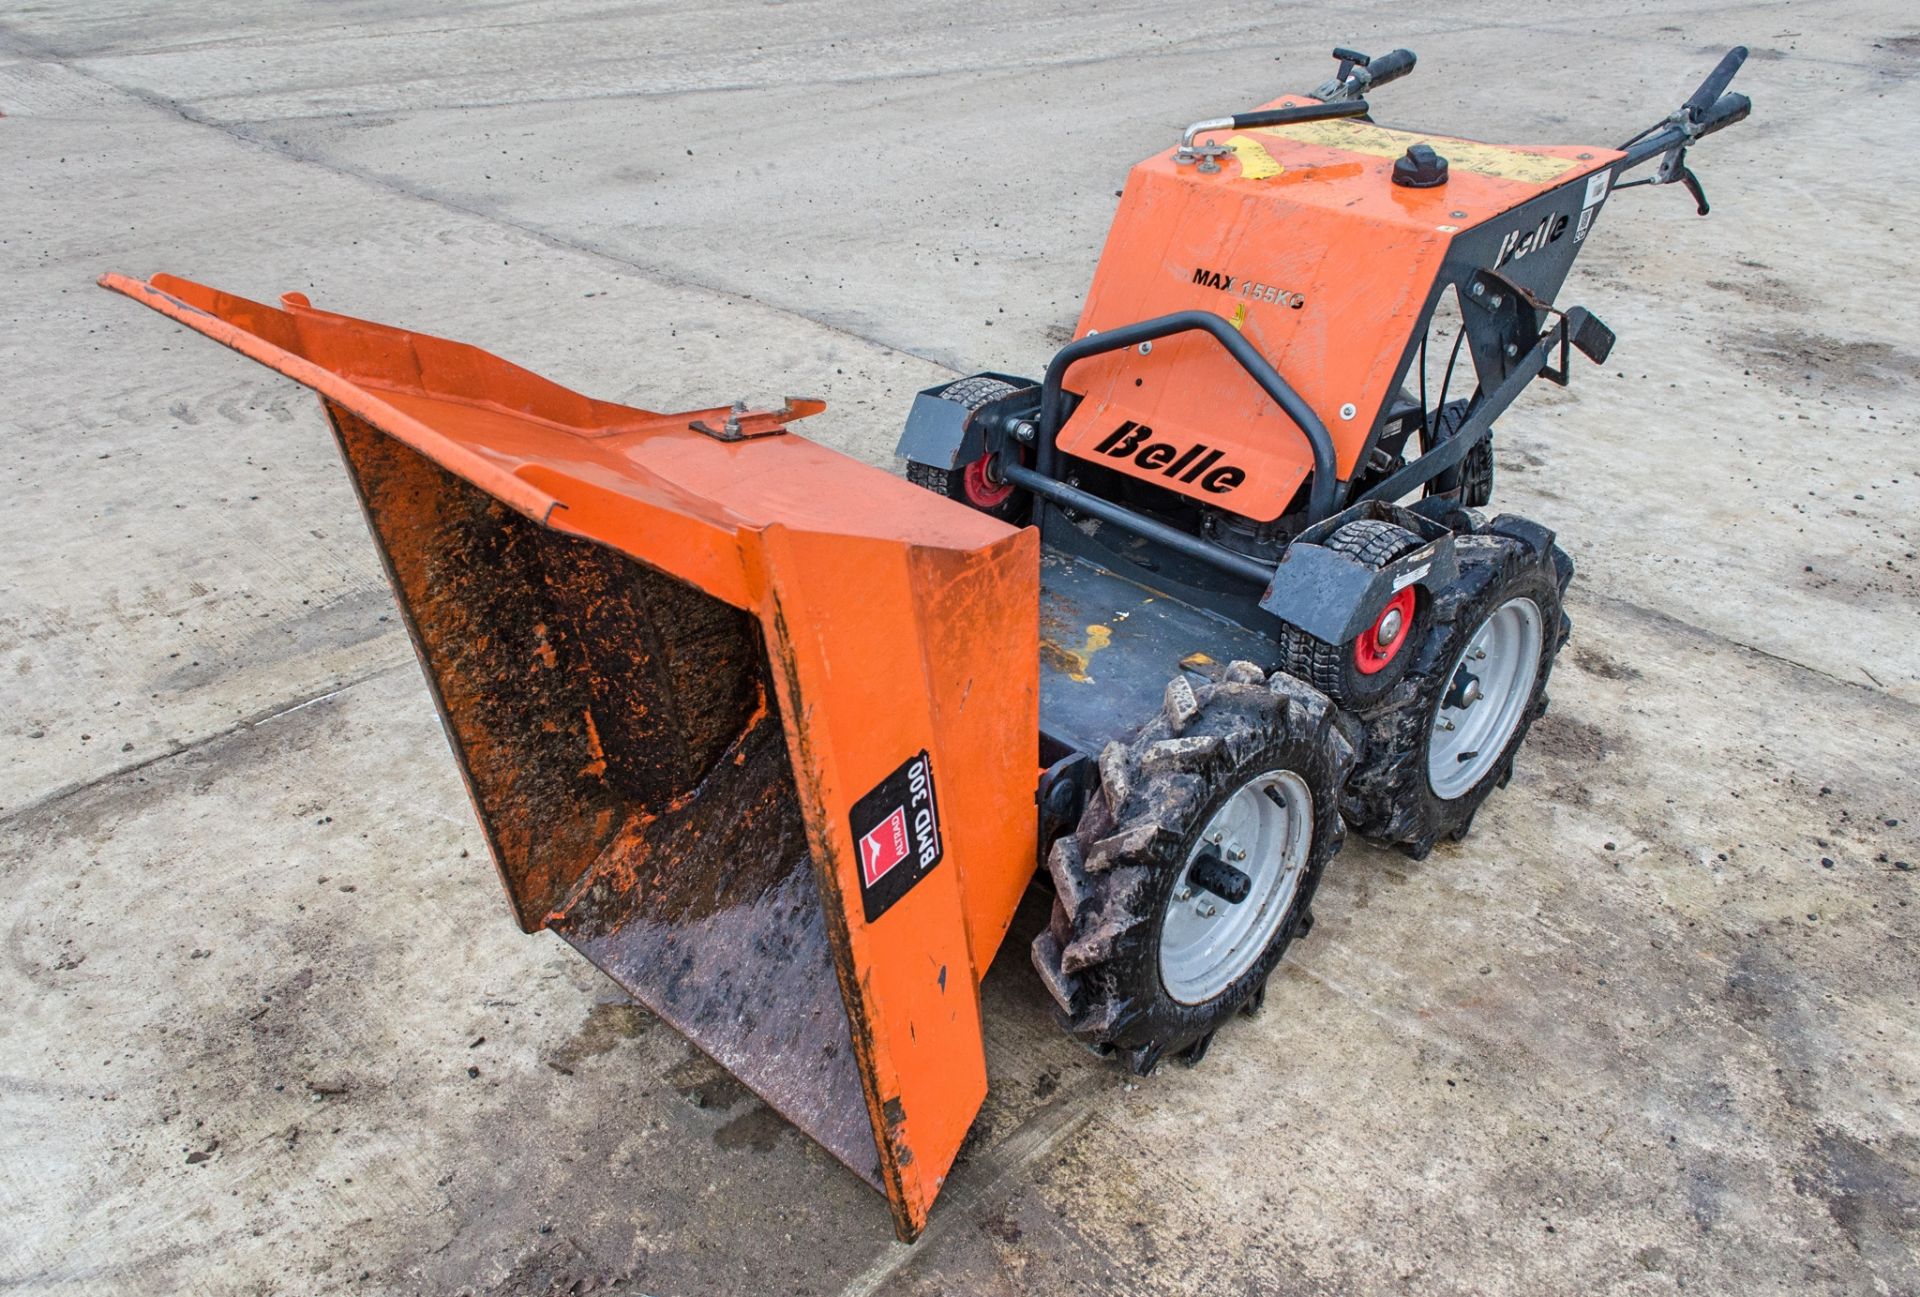 Belle BMD300 petrol driven power barrow Year: 2018 S/N: 148128 - Image 9 of 10